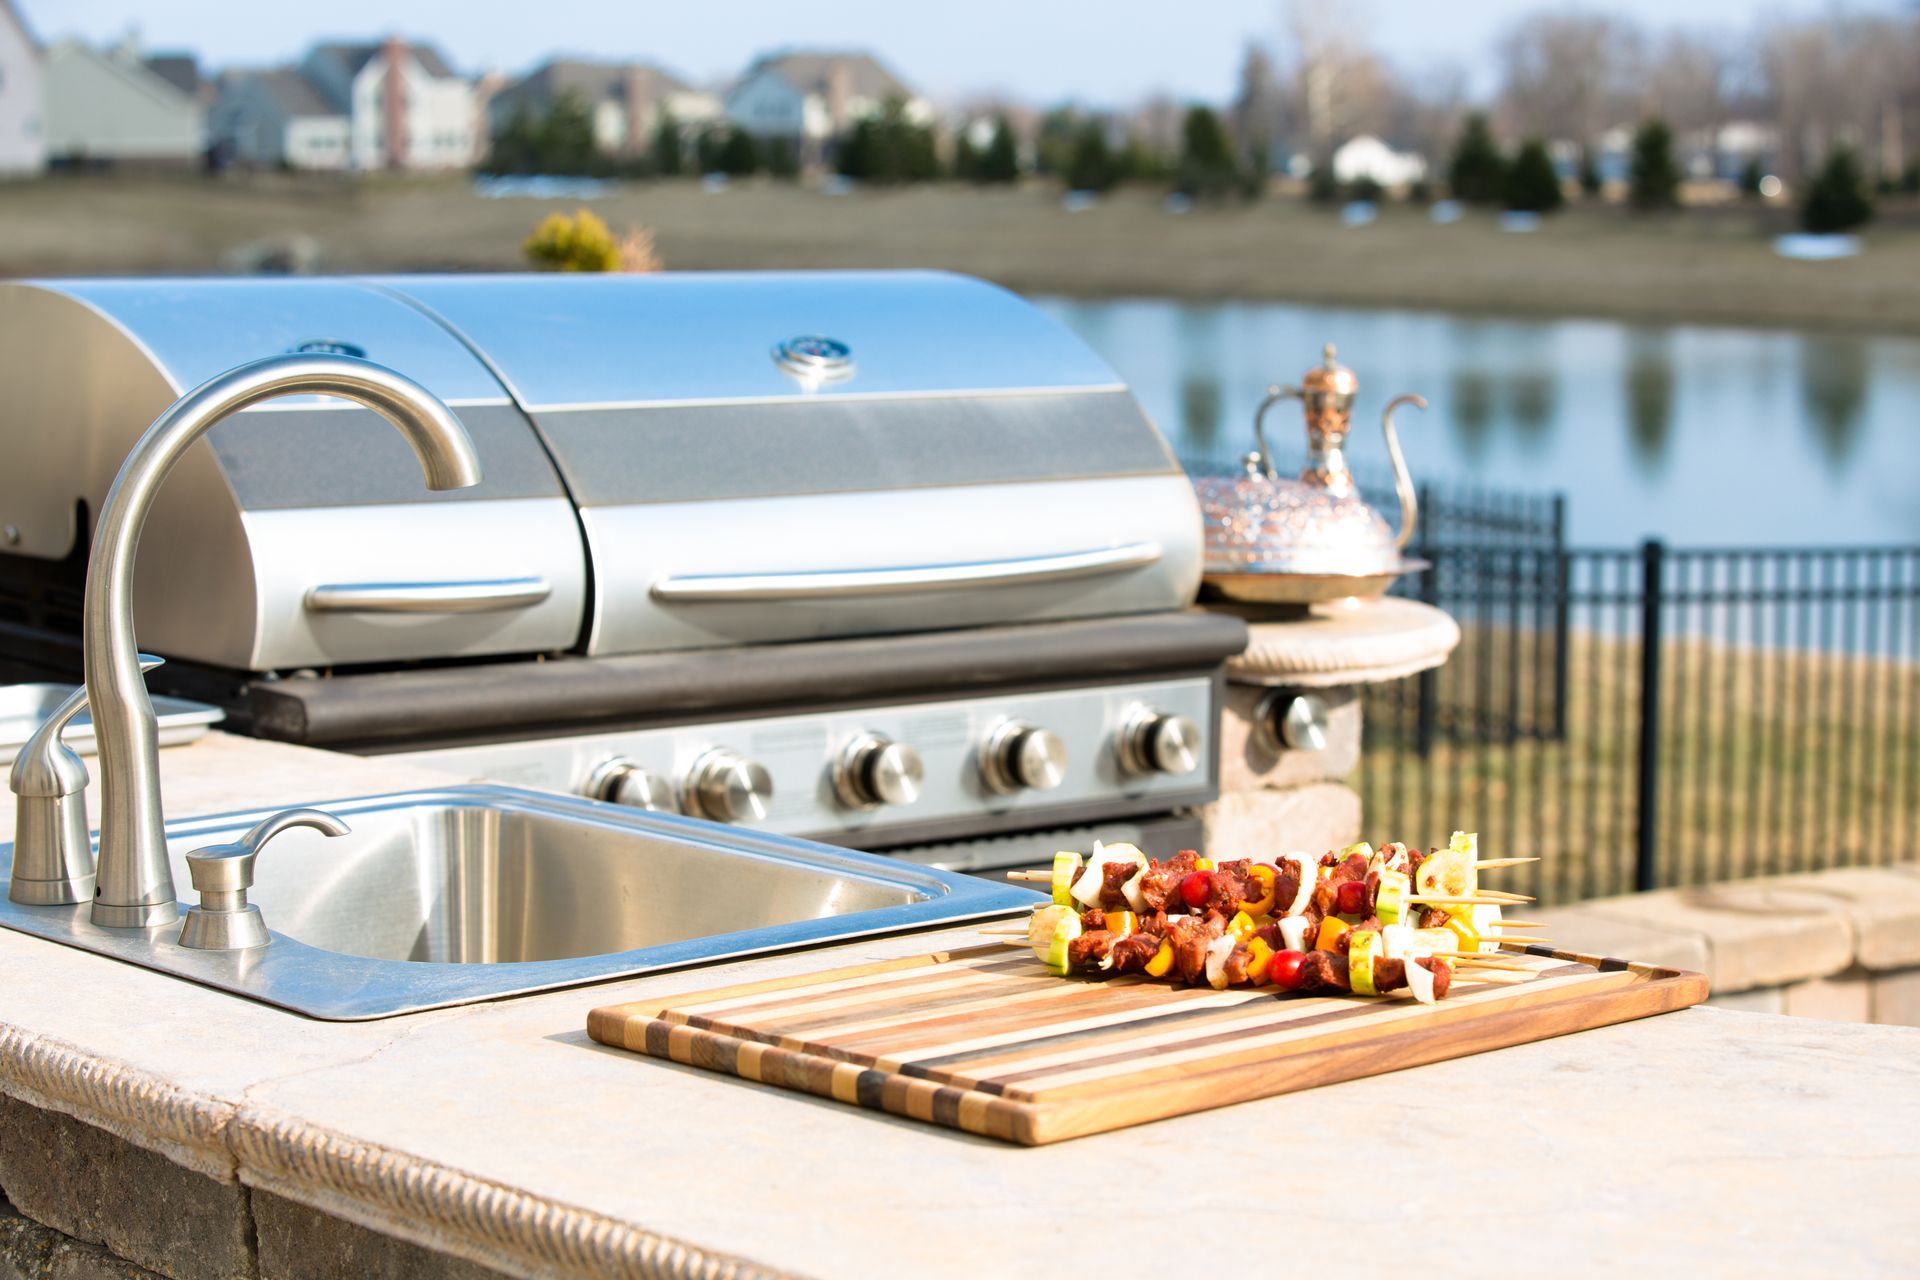 outdoor kitchen with barbeque on countertop